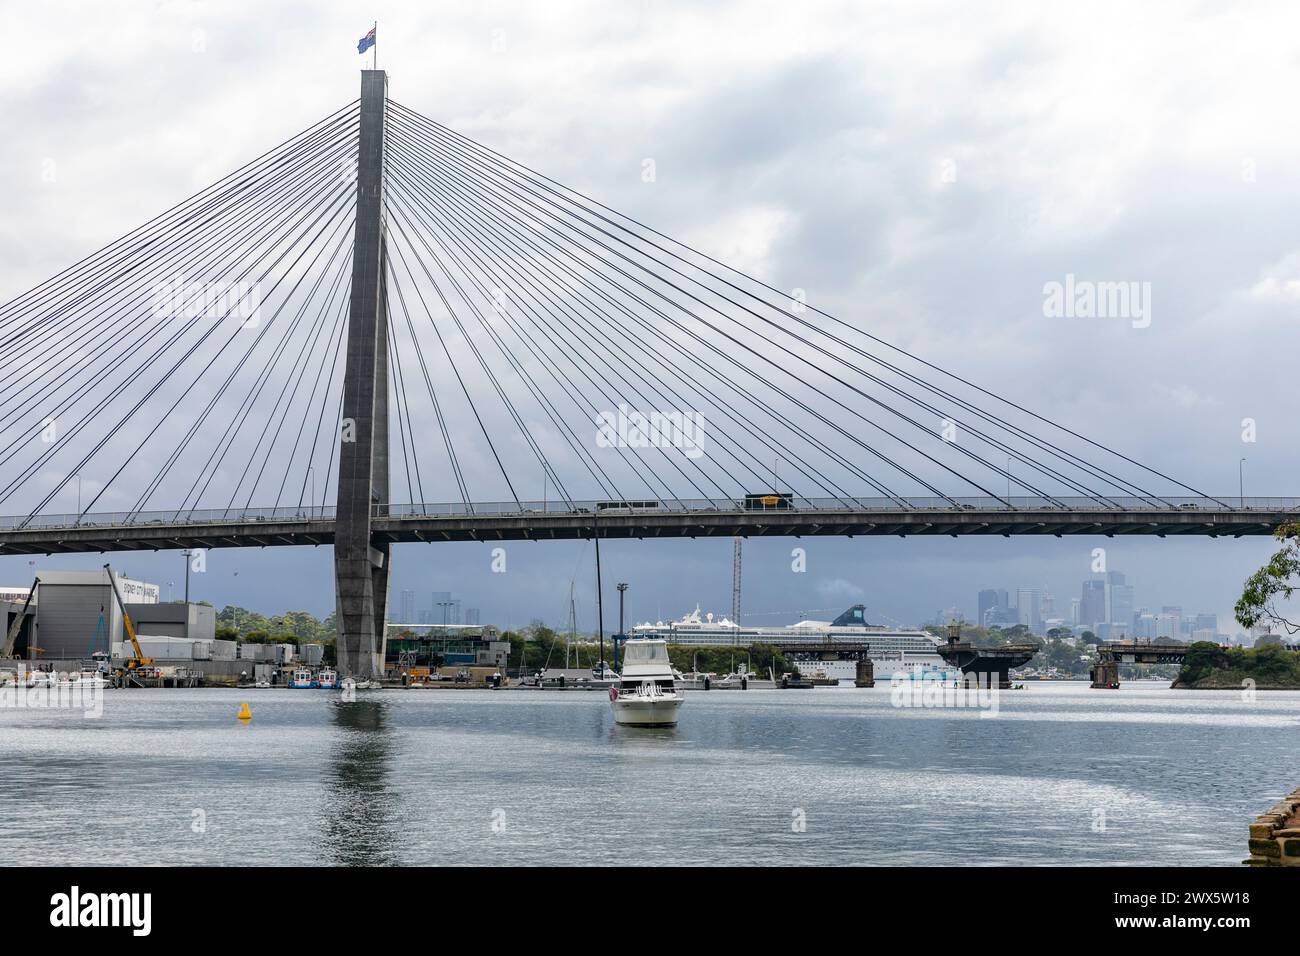 Anzac Bridge in Johnstone Bay,Glebe ,Sydney, with the old glebe bridge and cruise ship at White Bay in the distance, Sydney,New South Wales,Australia Stock Photo